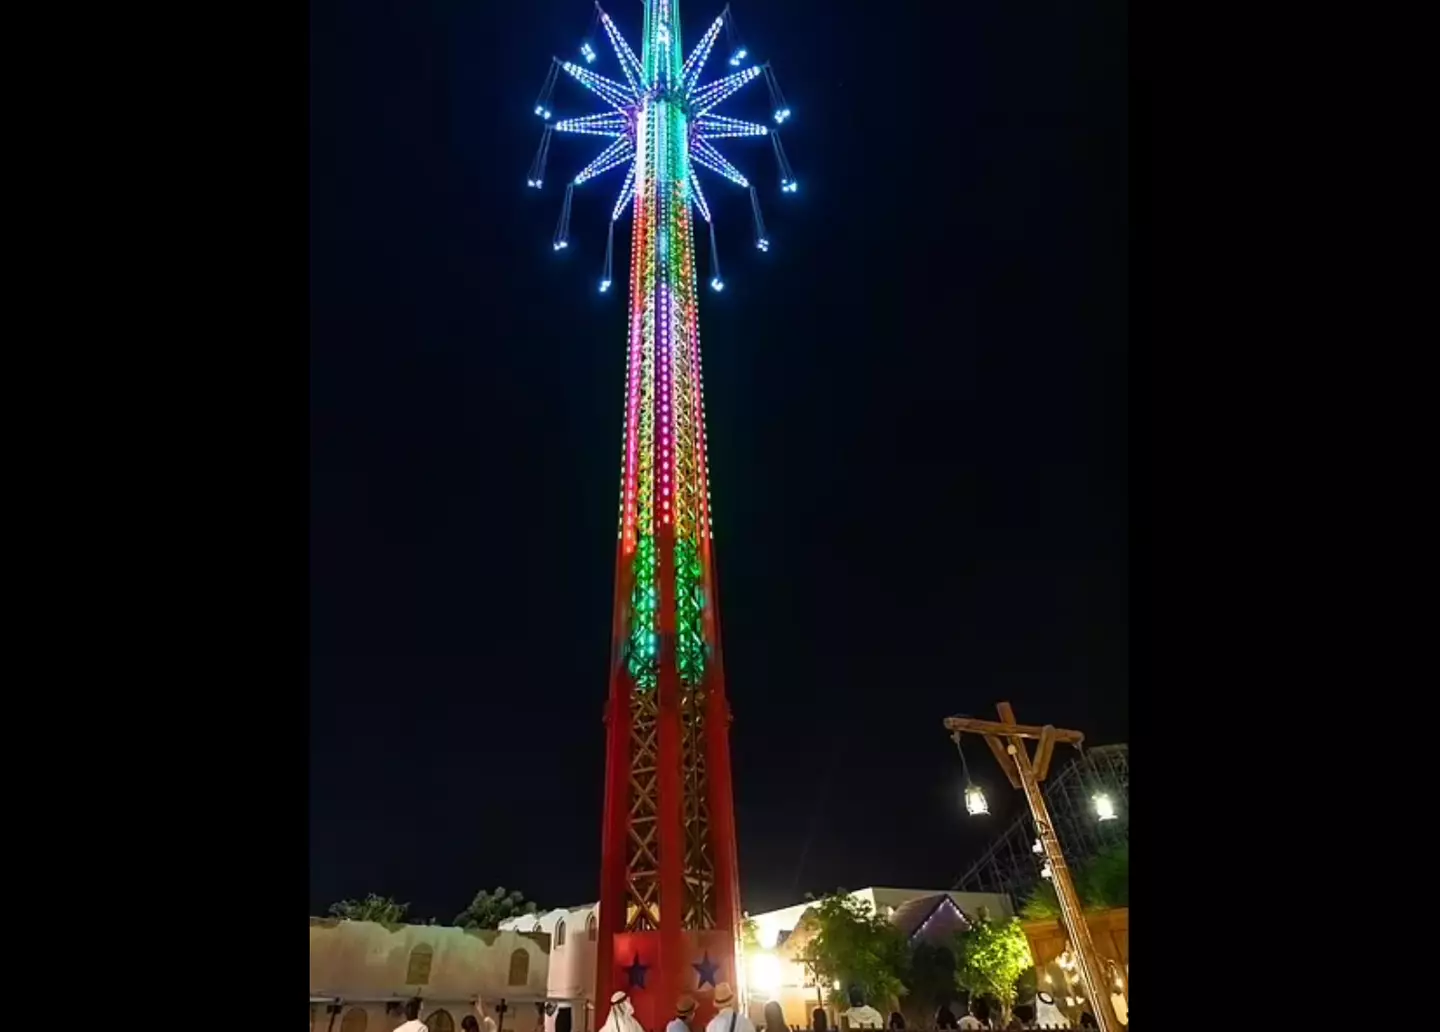 The ride overtook Orlando StarFlyer as the world's tallest free-standing swing ride.